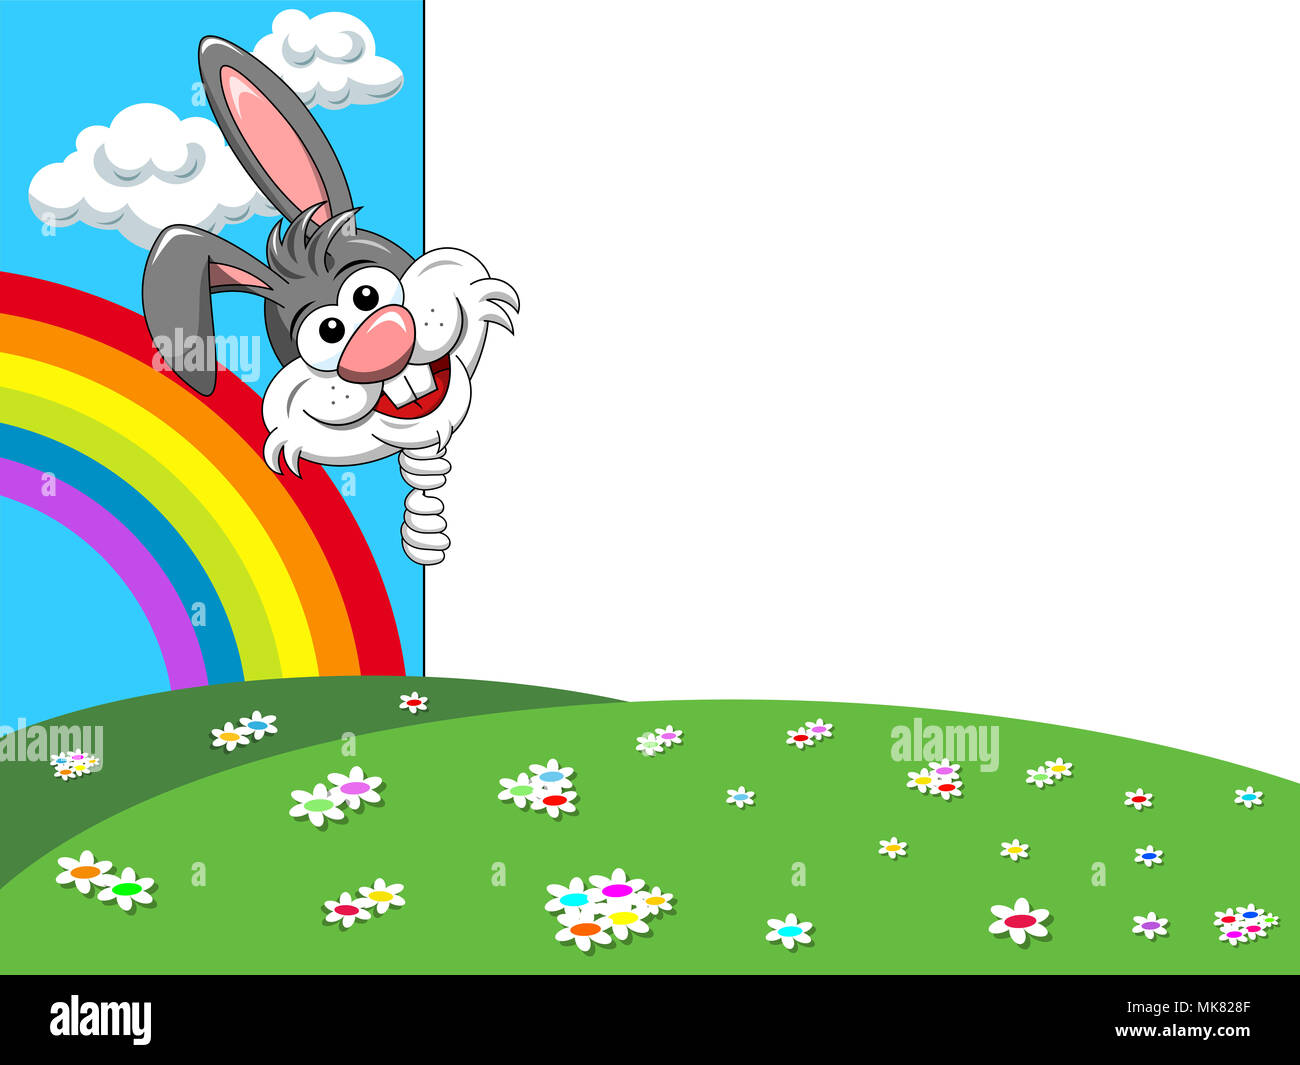 cartoon character or mascot rabbit peeking behind blank poster on spring  nature outdoor background Stock Photo - Alamy